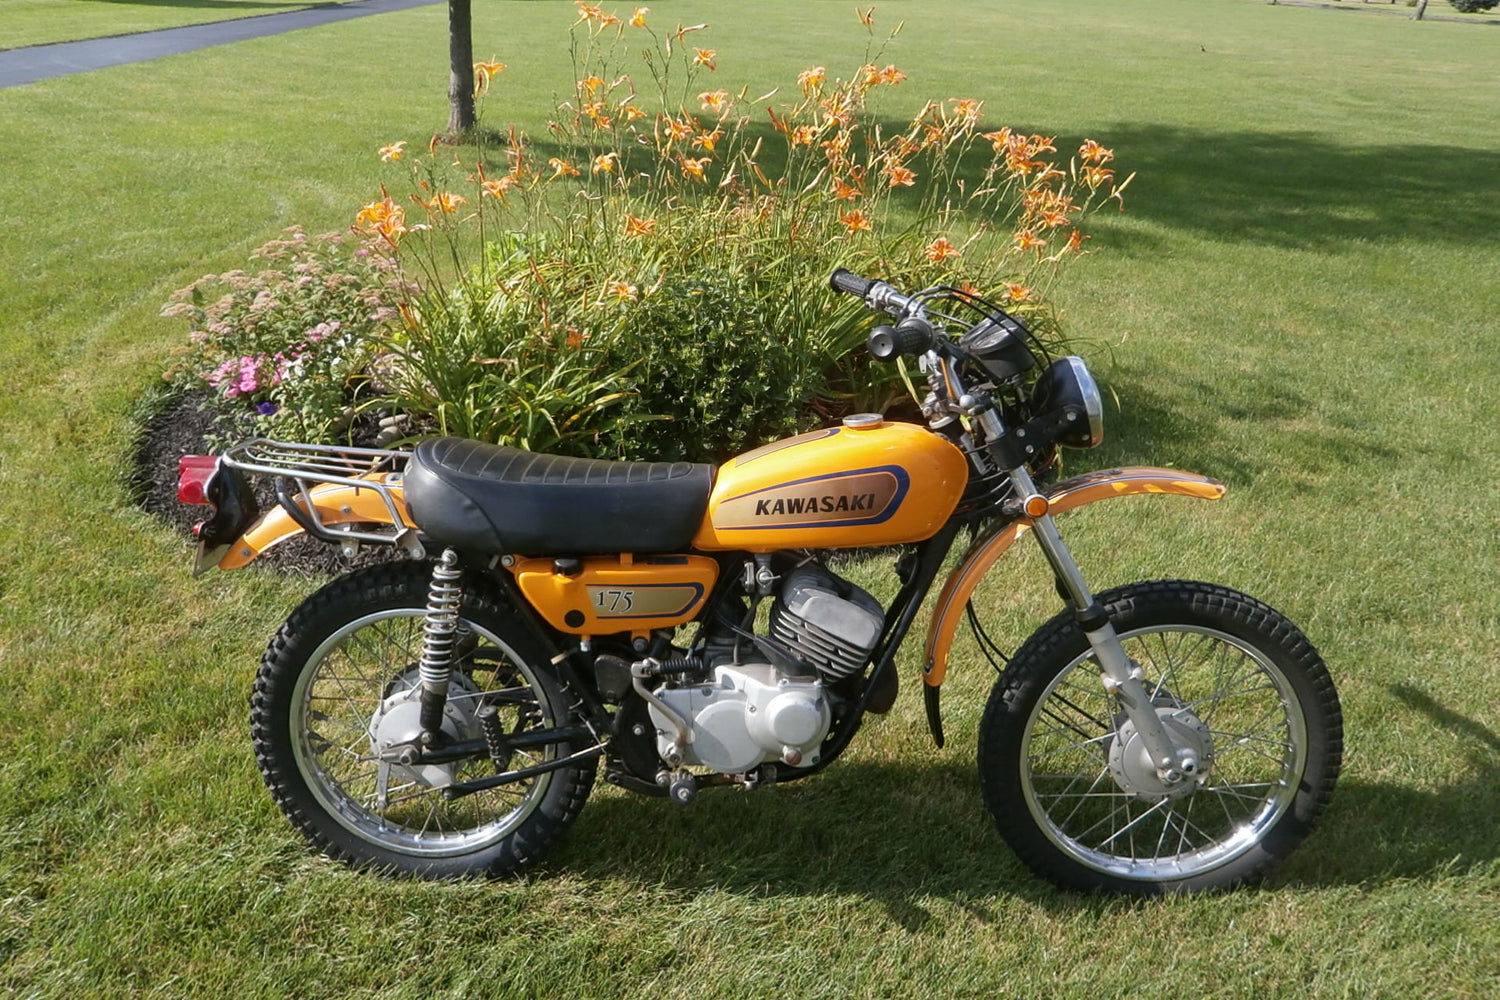 Classic Japanese Motorcycles-Not Available to Order Online